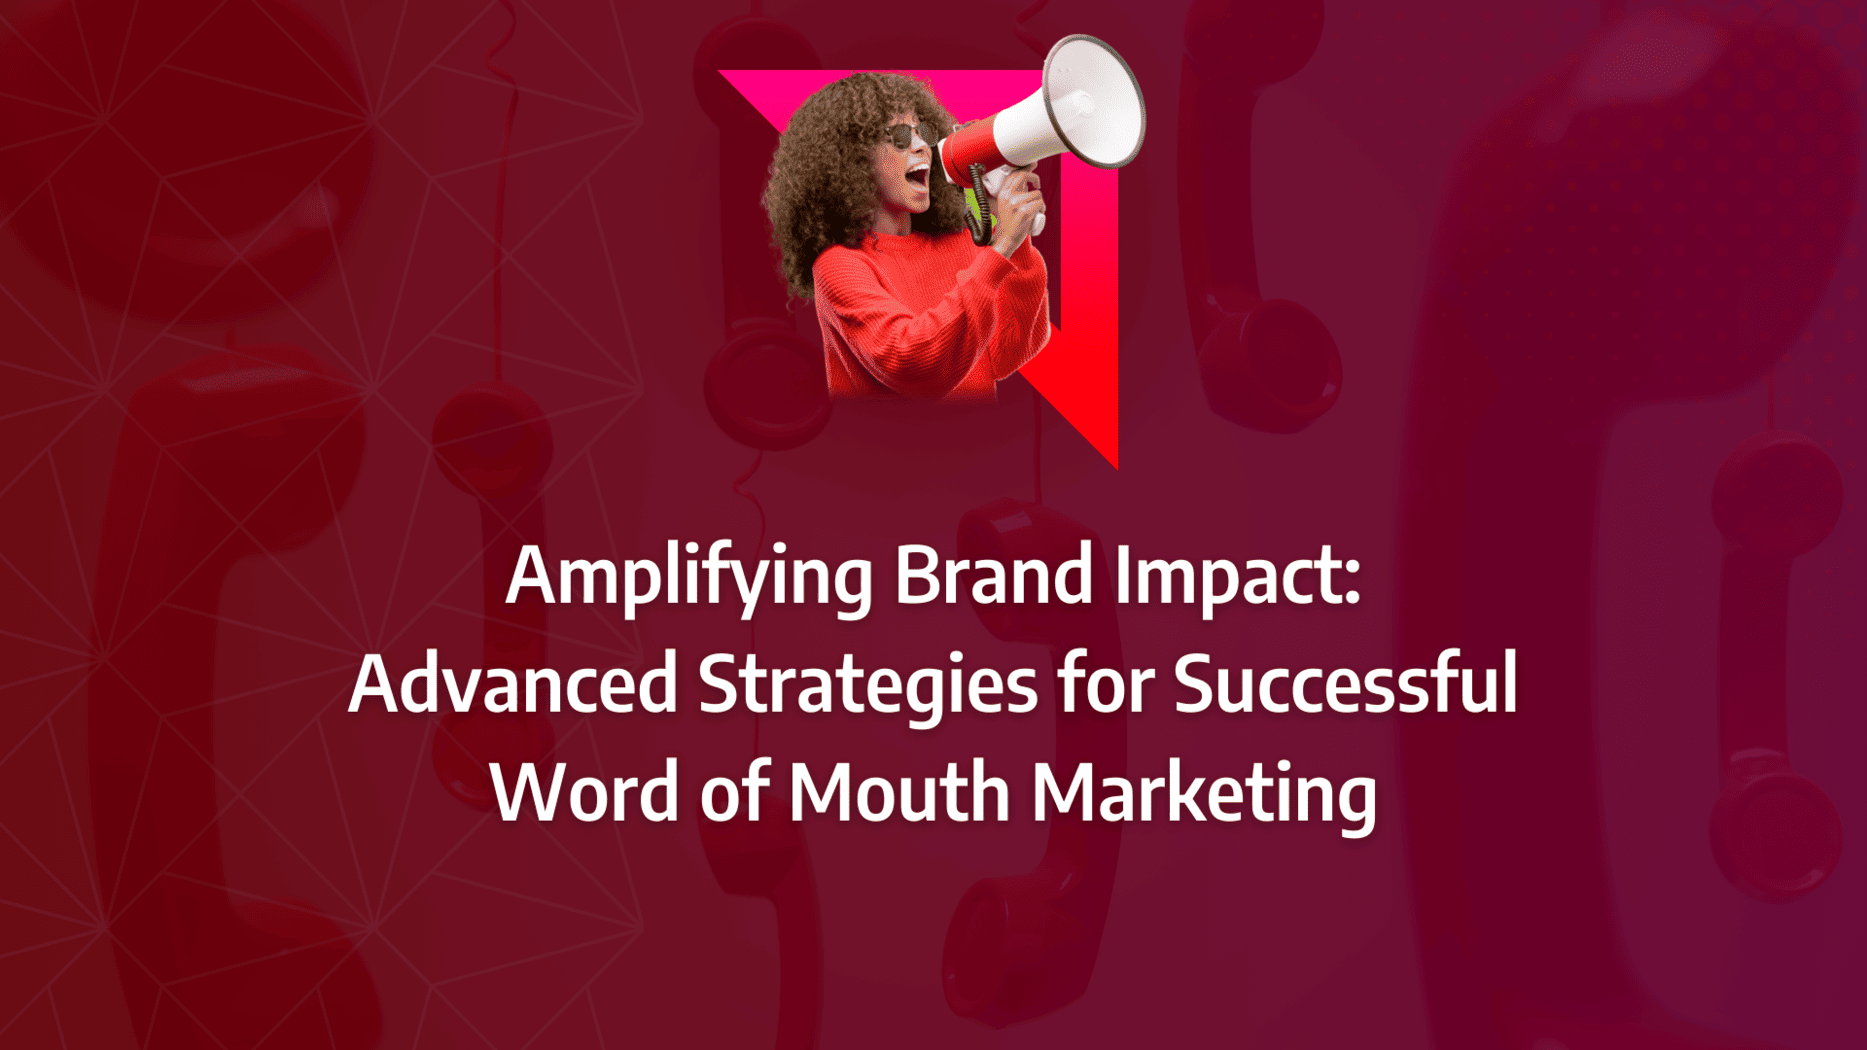 Word of mouth marketing: dynamically propelled by strategic marketing strategies, innovative techniques, targeted campaigns, and insightful survey questions for amplified customer advocacy and brand impact.: strategy framework diagram for word of mouth marketing strategies, word of mouth marketing techniques, word of mouth marketing campaigns, word of mouth marketing survey questions